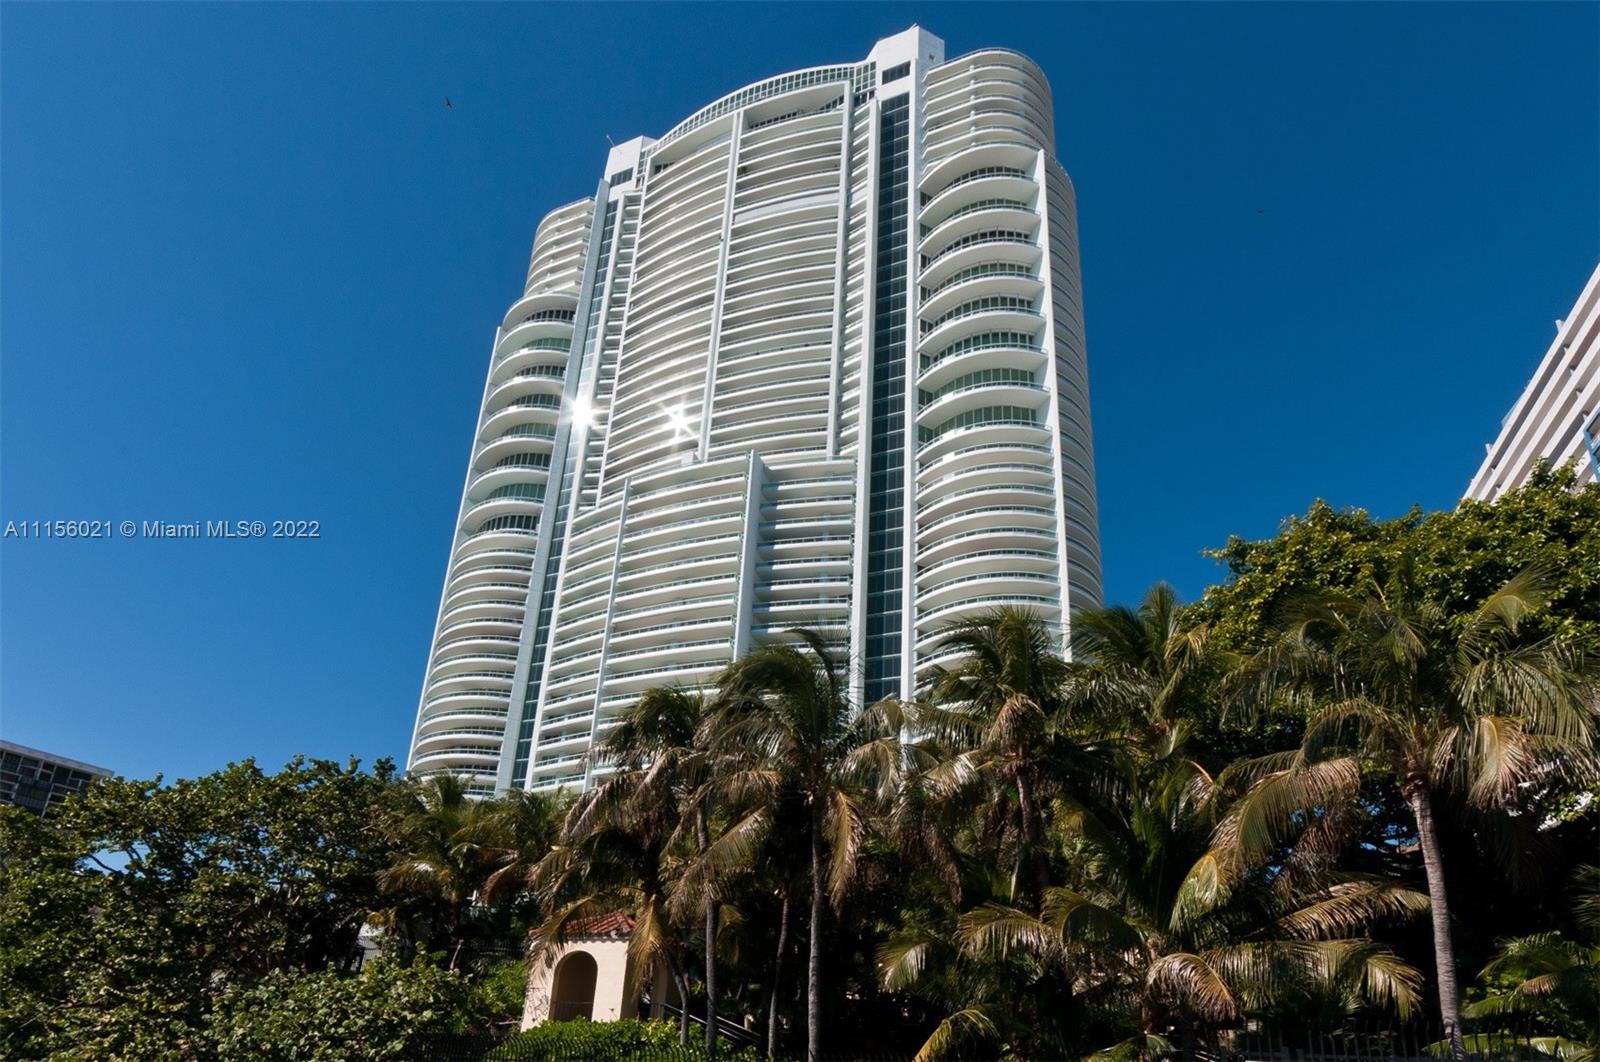 HIGH IN THE SKY, THIS FLOW-THROUGH RESIDENCE ON THE 30TH FLOOR OFFERS OCEAN AND CITY SKYLINE VIEWS. ALSO FEATURING A FANTASTIC LAYOUT, 4,030 SQ.FT. OF LIVING AREA, PRIVATE ELEVATOR FOYER, 4 BEDS & 5.5 BATHS, DISTRIBUTION HALL THAT SEPARATES SOCIAL AREAS FROM PRIVATE ONES, MARBLE FLOORS, HUGE WALK-IN CLOSETS IN MASTER BEDROOM, ITALIAN SNAIDERO KITCHEN WITH TOP OF THE LINE APPLIANCES, MAID’S QUARTERS WITH FULL BATHROOM, 2 ASSIGNED PARKING SPACES, STORAGE UNIT, 2 EXPANSIVE TERRACES WITH PANORAMIC VIEWS OF THE ATLANTIC OCEAN, BISCAYNE BAY & MIAMI SKYLINE. SANTA MARIA’S DISTINCTIVE LIFESTYLE WITH OUTSTANDING AMENITIES MAKES LIVING HERE THE BEST CHOICE IN SOUTH FLORIDA.